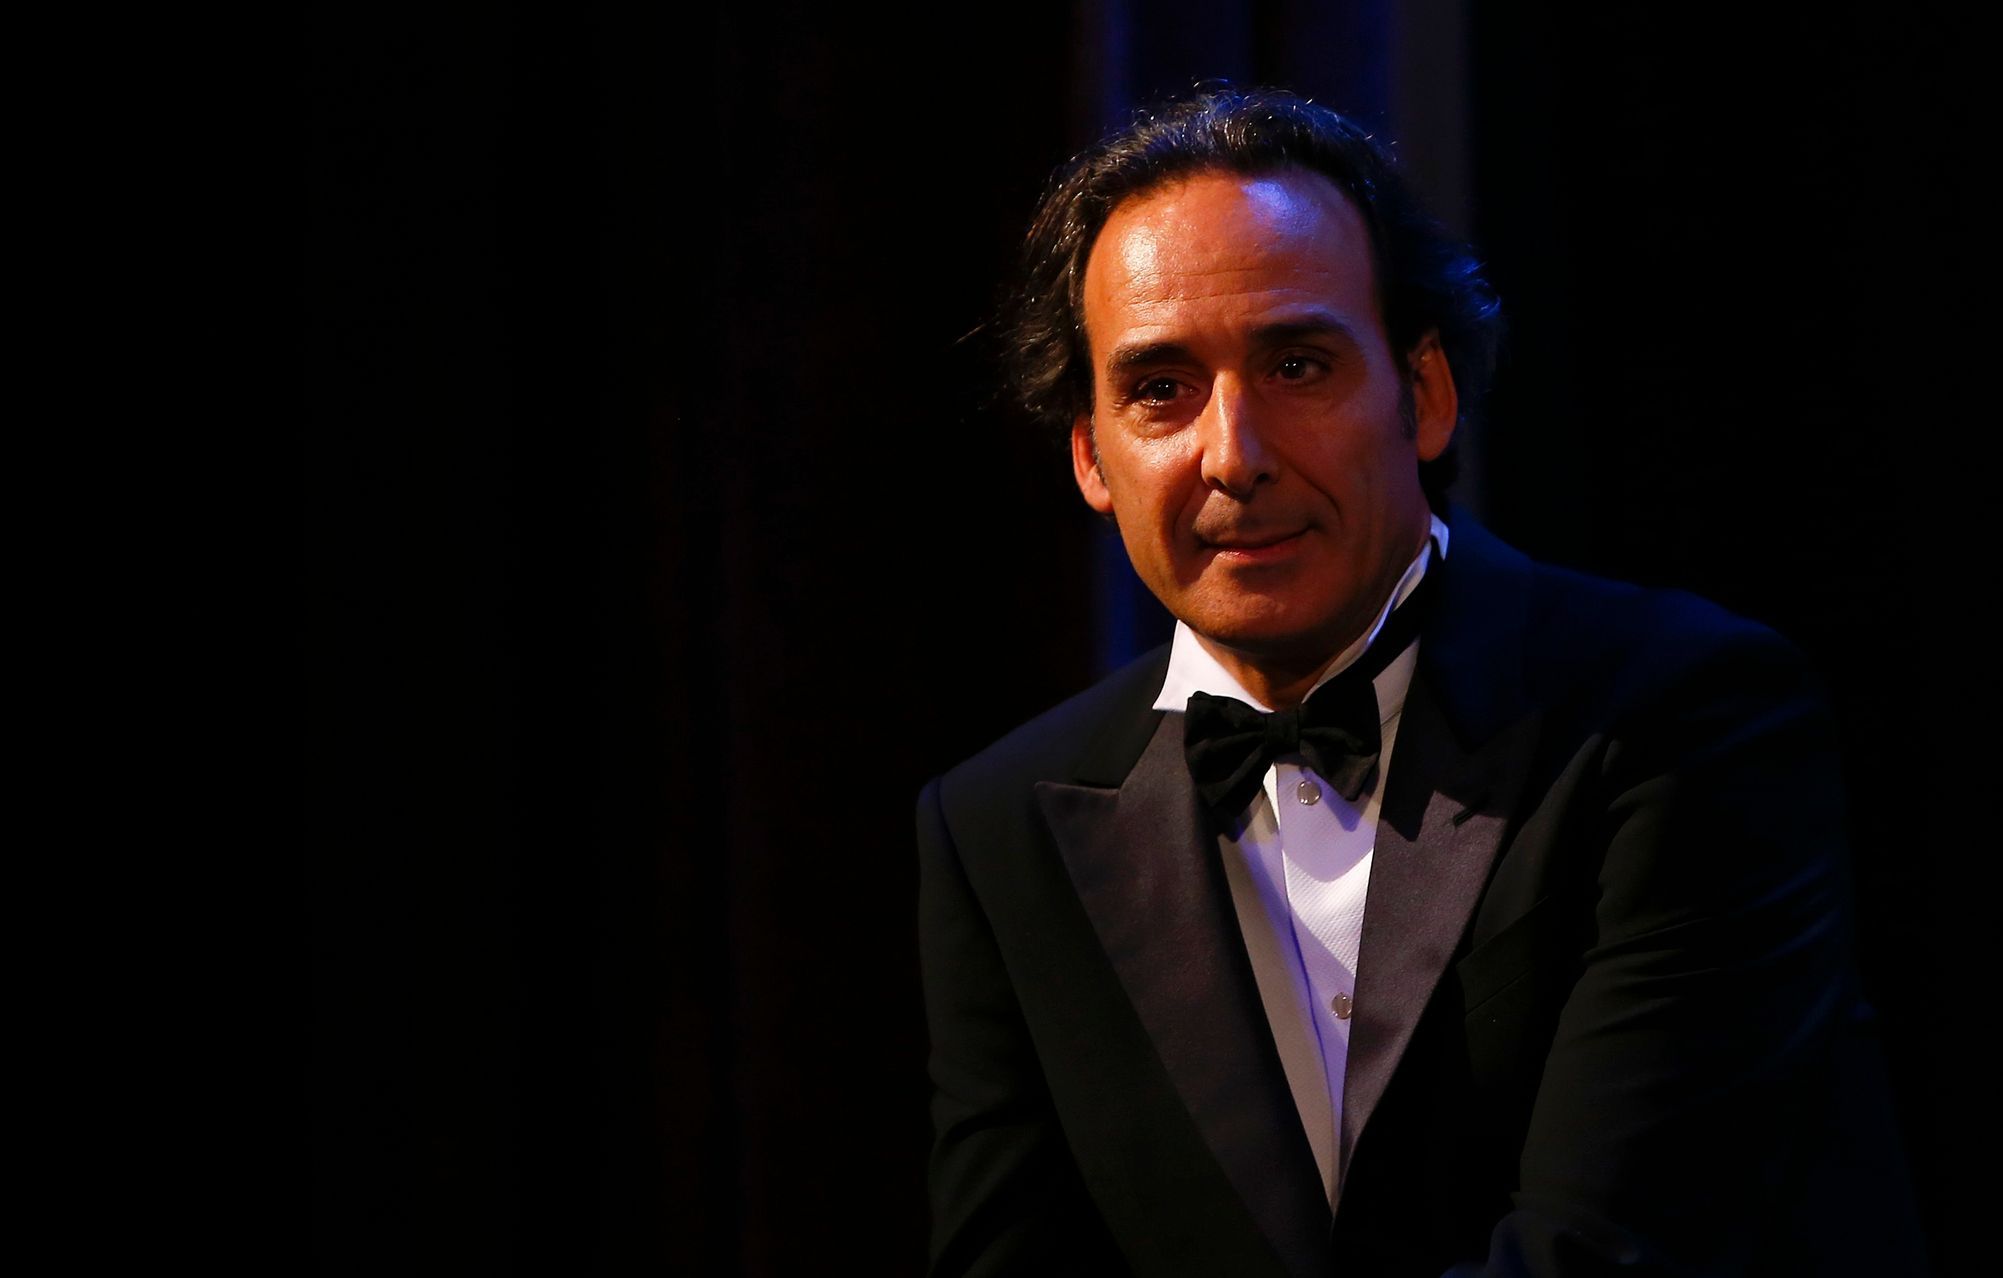 French composer Alexandre Desplat, the president of the jury at the 71st Venice Film Festival, attends the opening ceremony in Venice